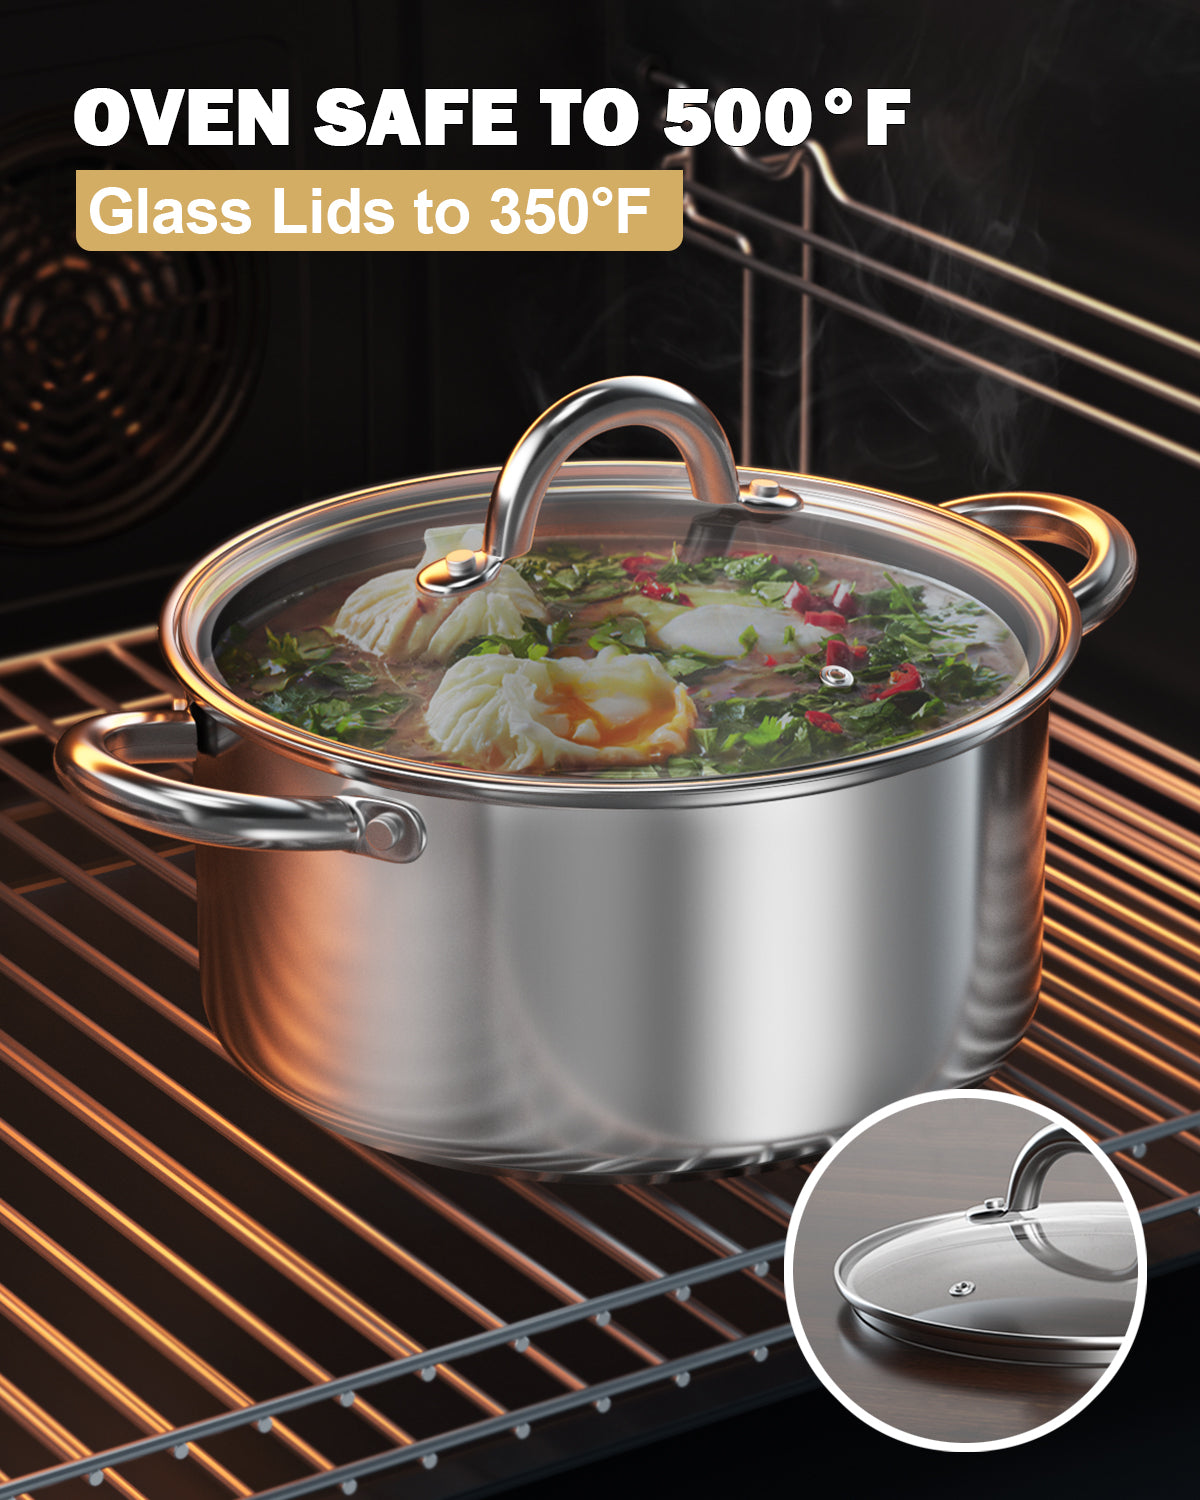 5 Quart Stainless Steel Stock Pot with Lid